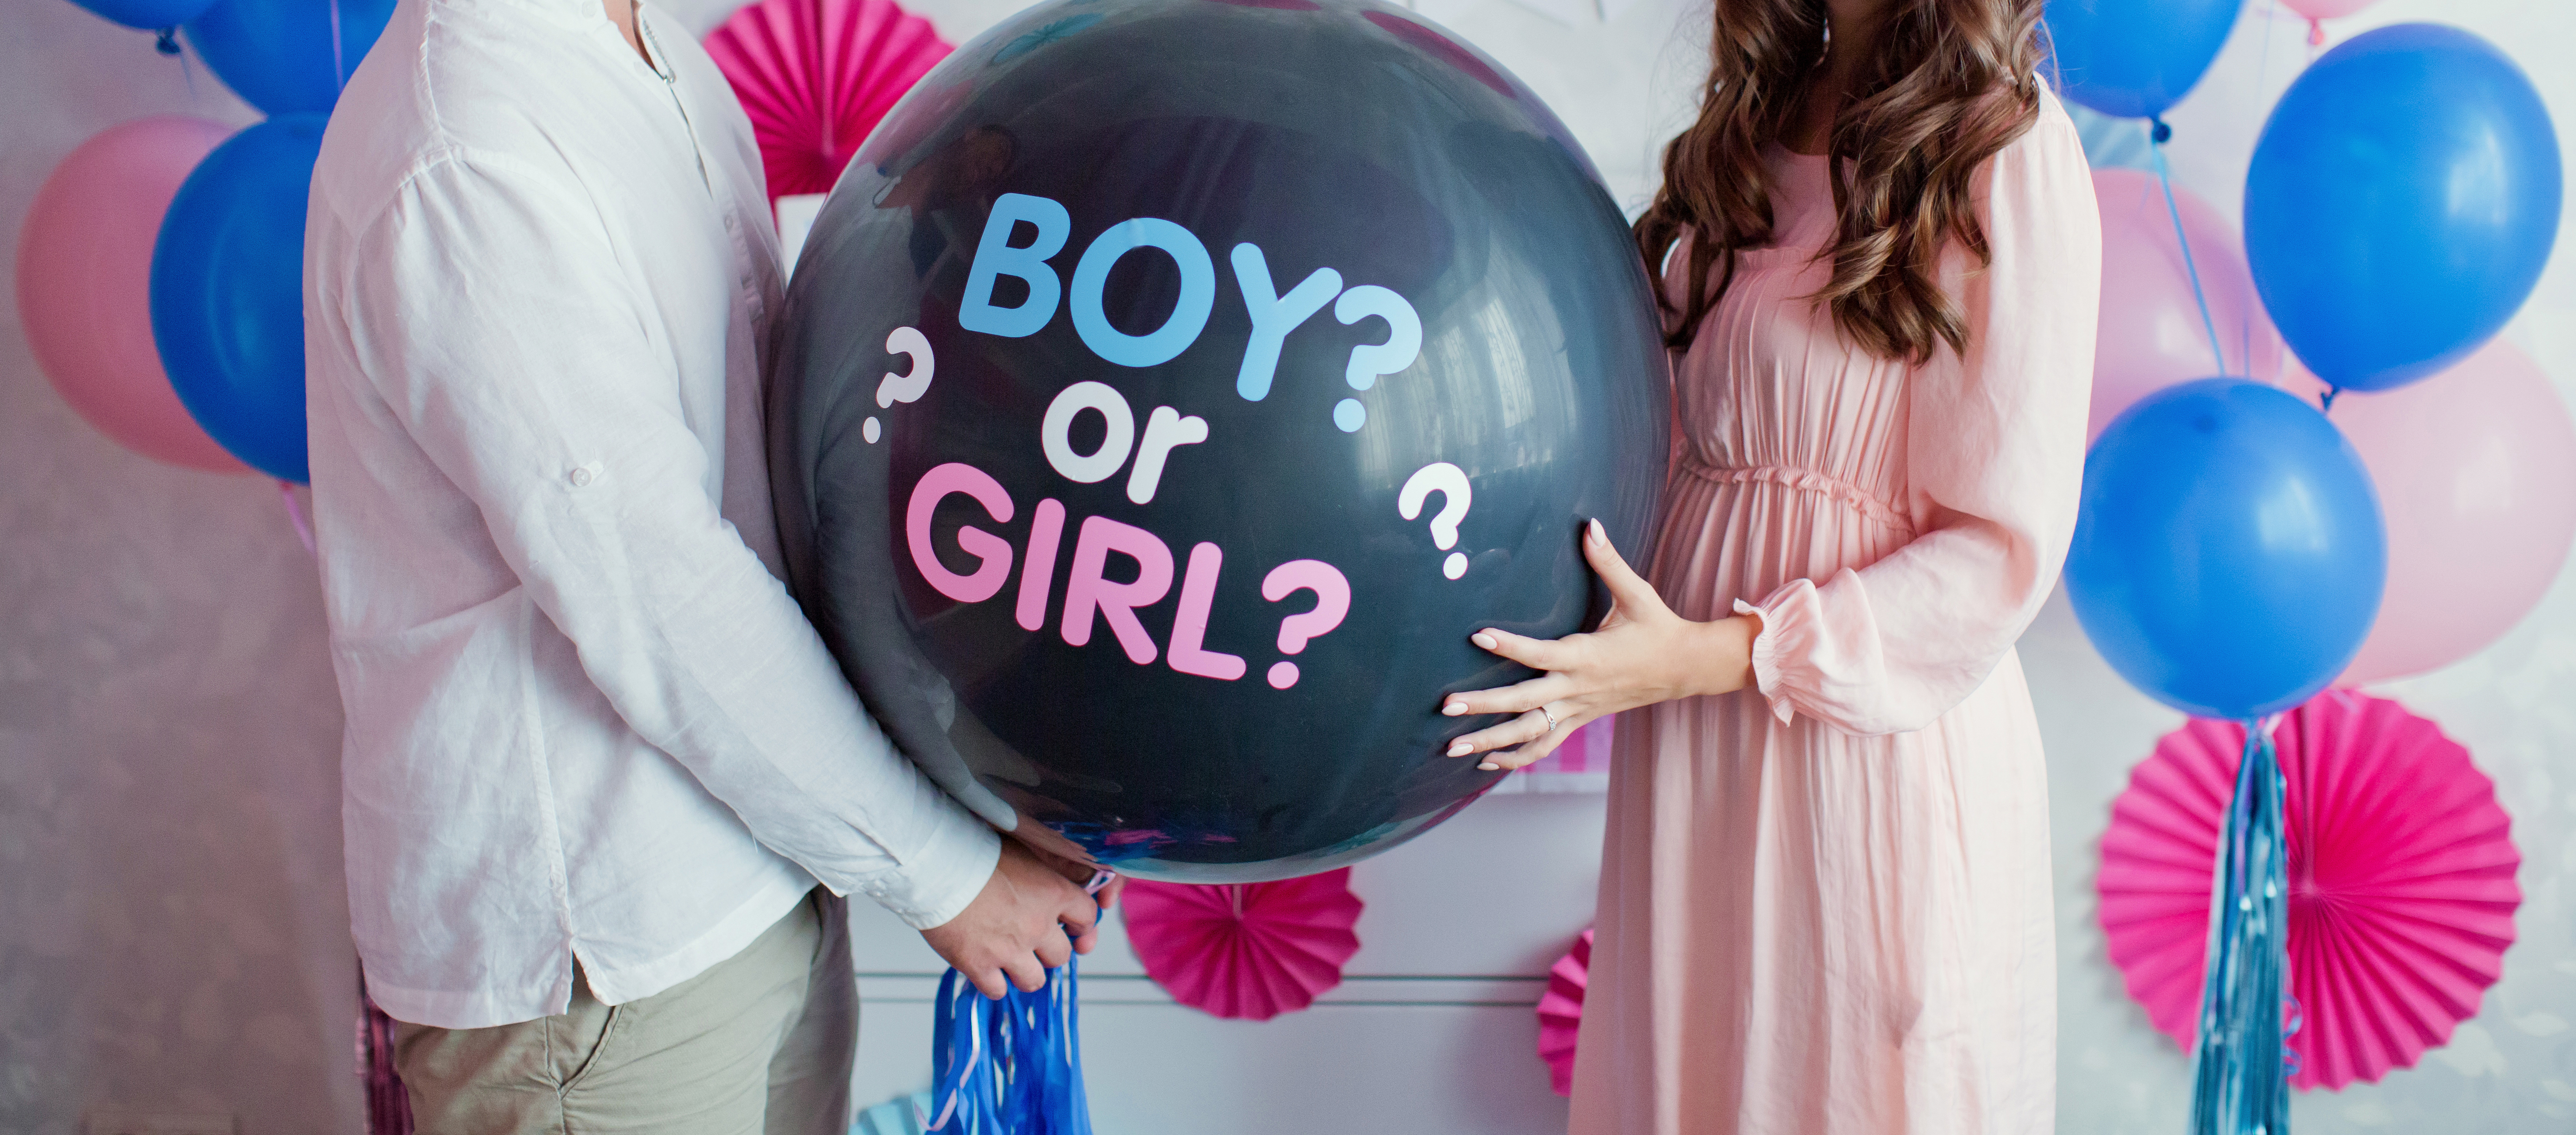 A couple at a gender reveal party | Source: Shutterstock